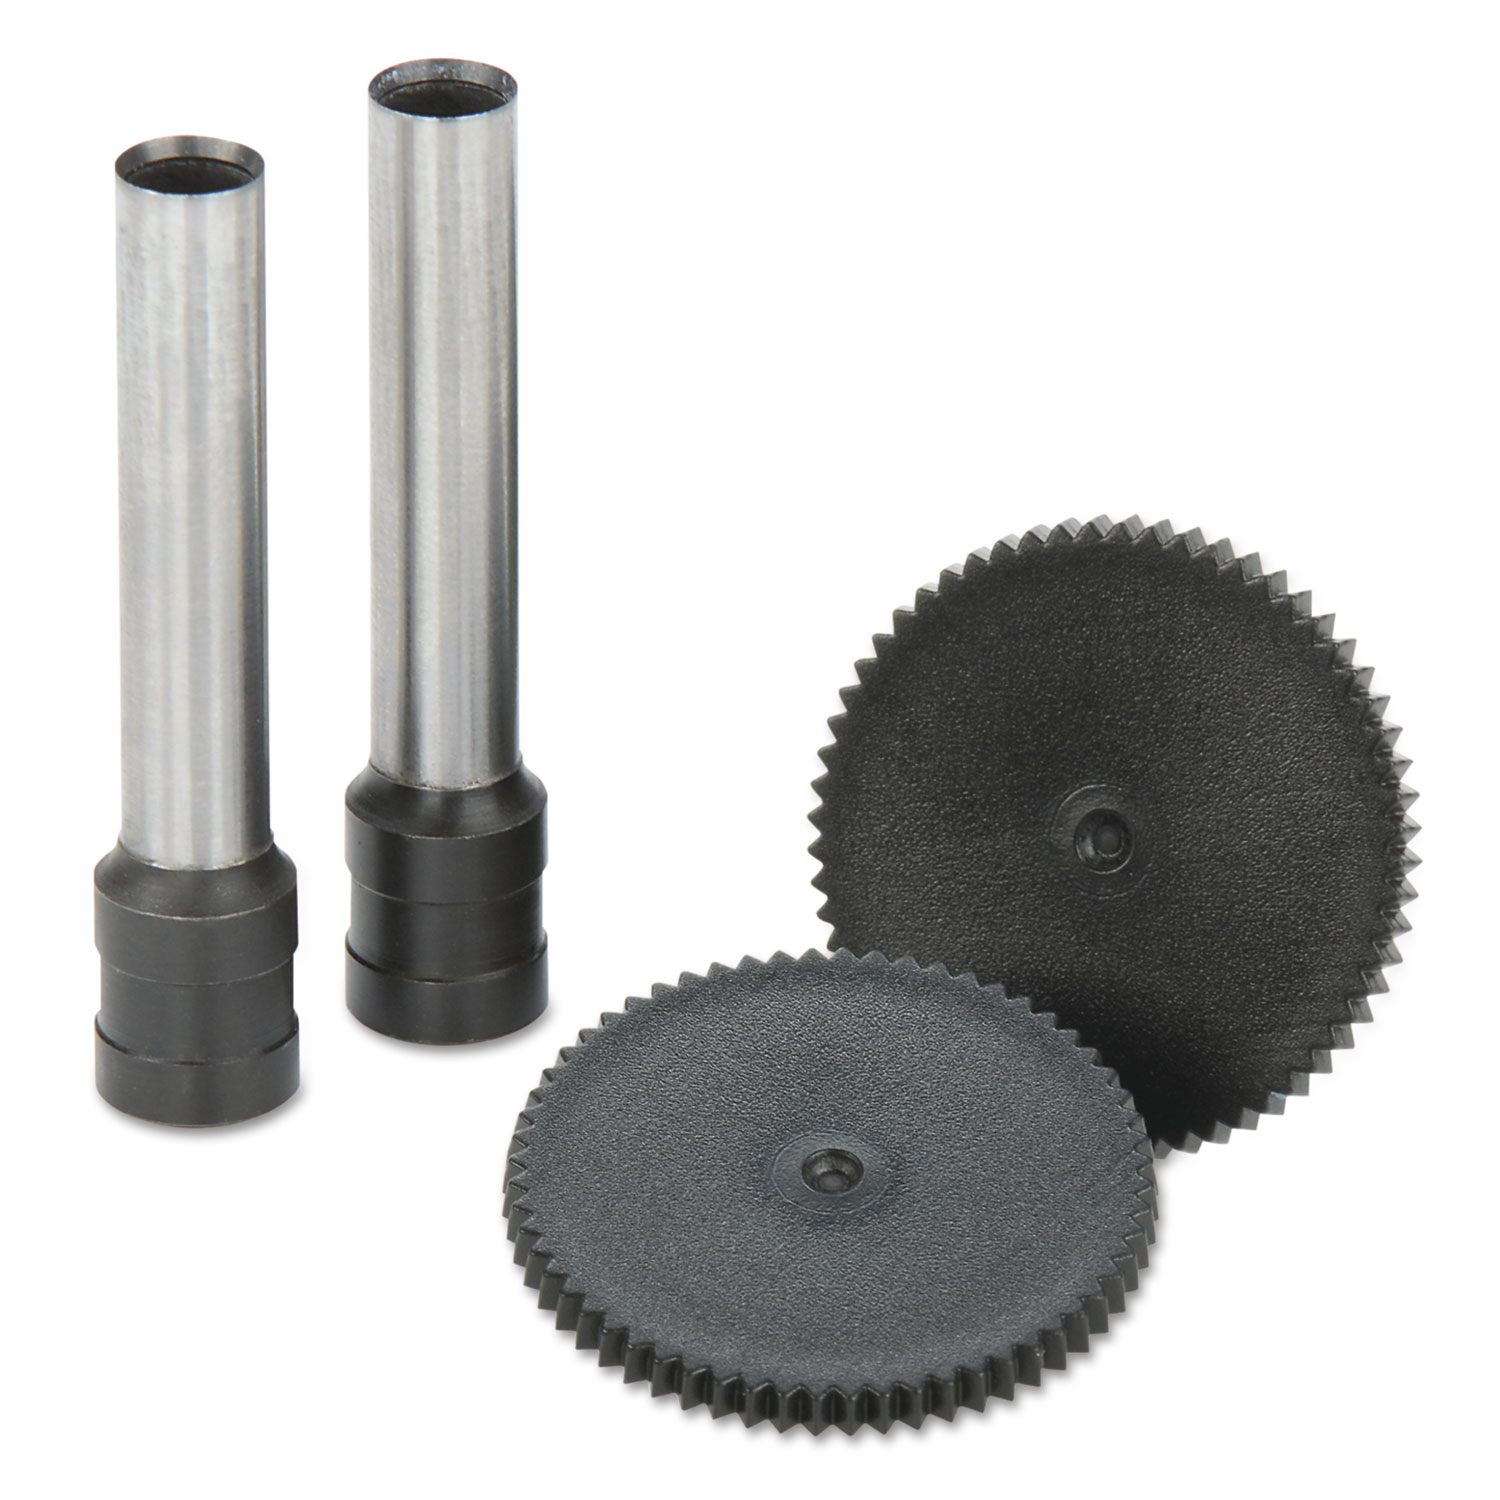 Replacement Punch Kit for Extra High-Capacity Two-Hole Punch, 9/32 Diameter